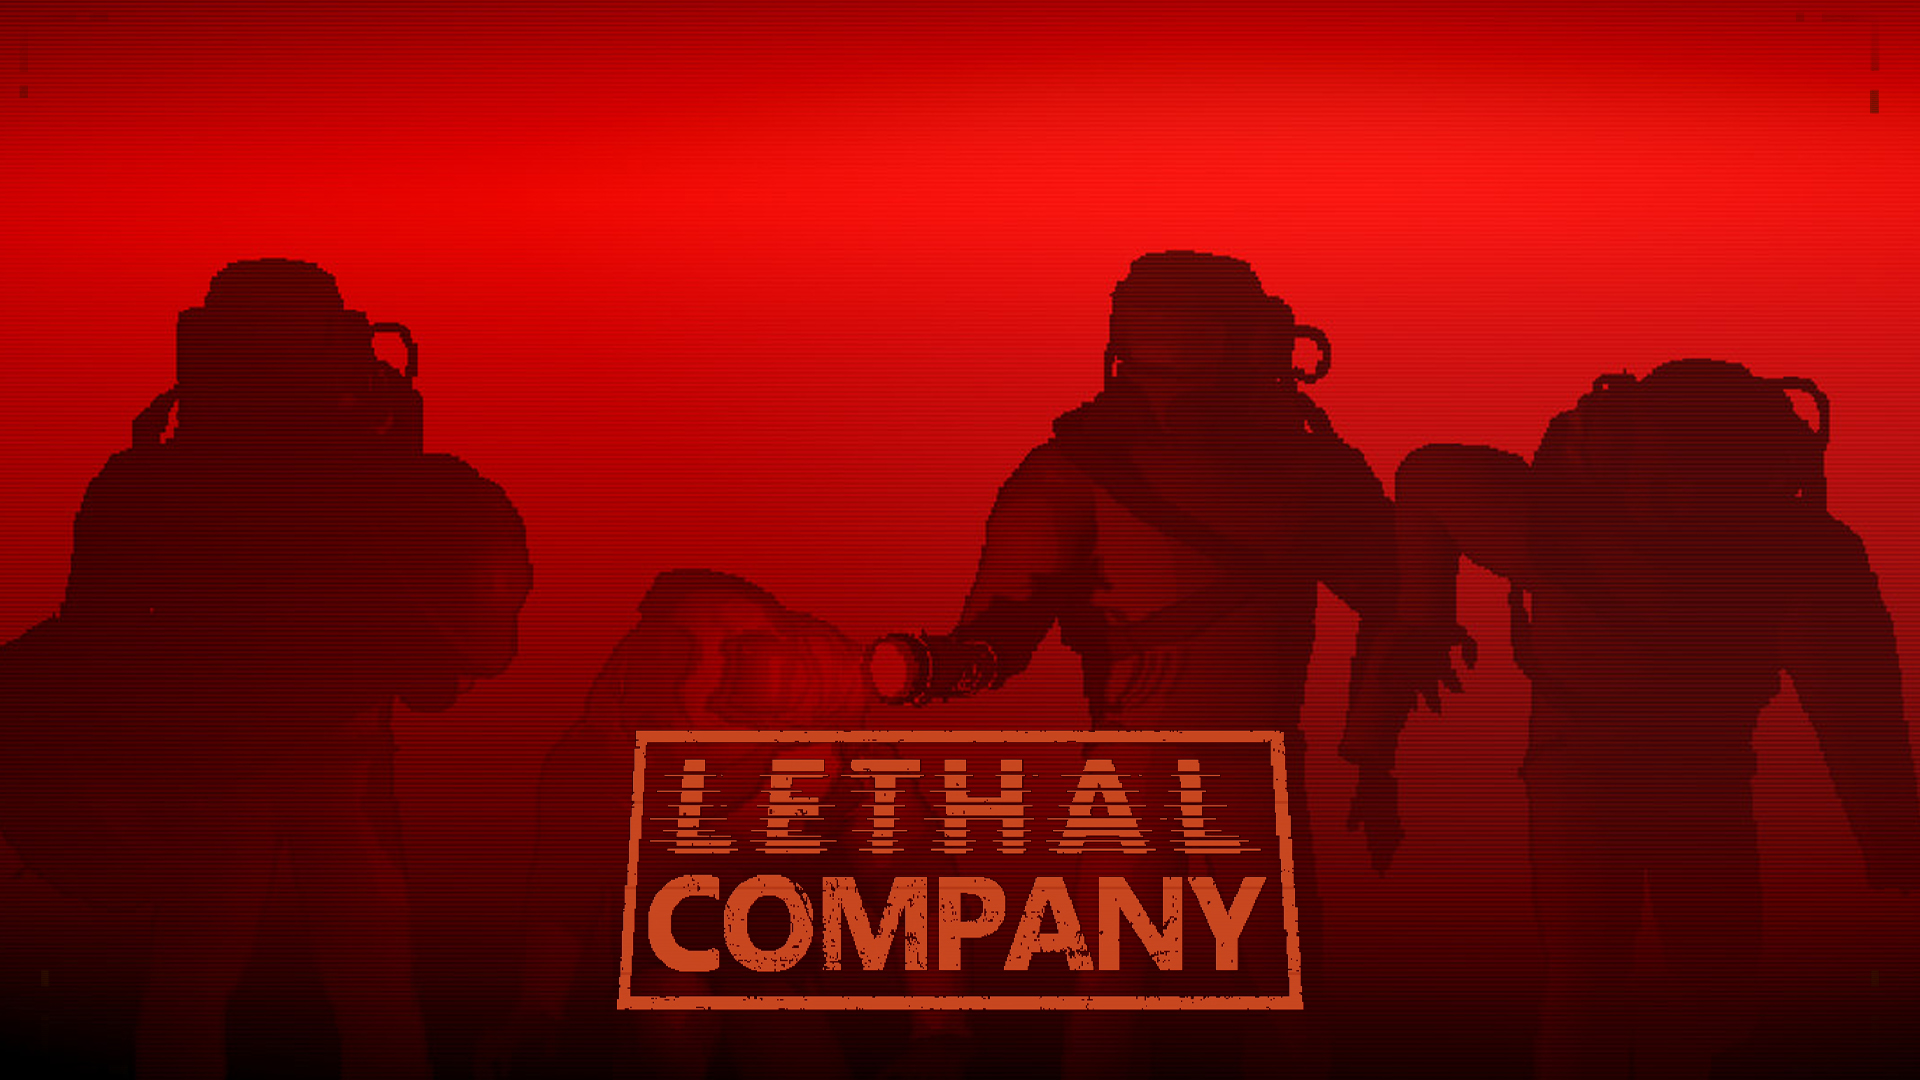 Lethal Company: Image Gallery (List View)